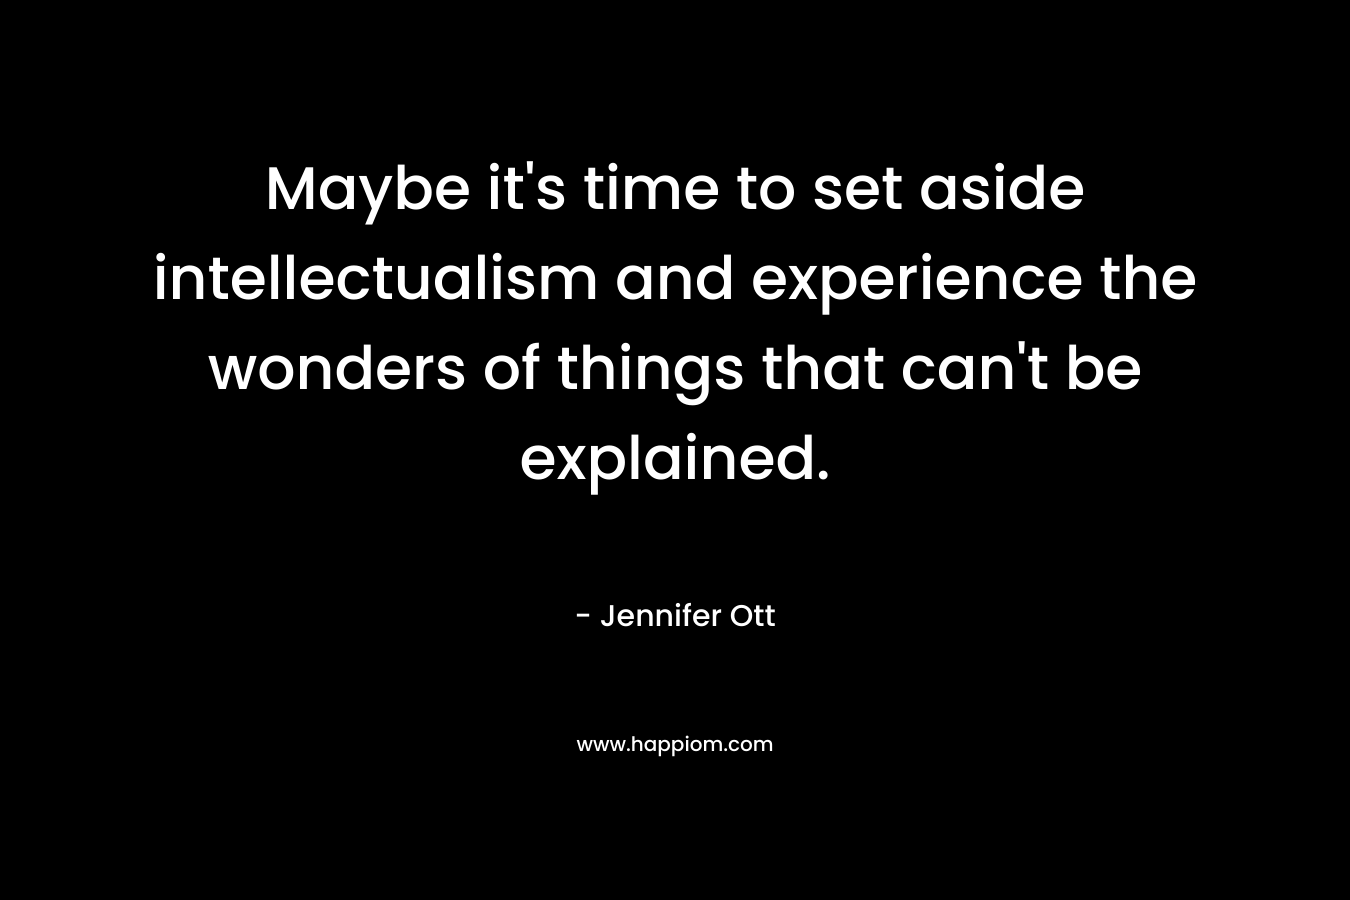 Maybe it's time to set aside intellectualism and experience the wonders of things that can't be explained.